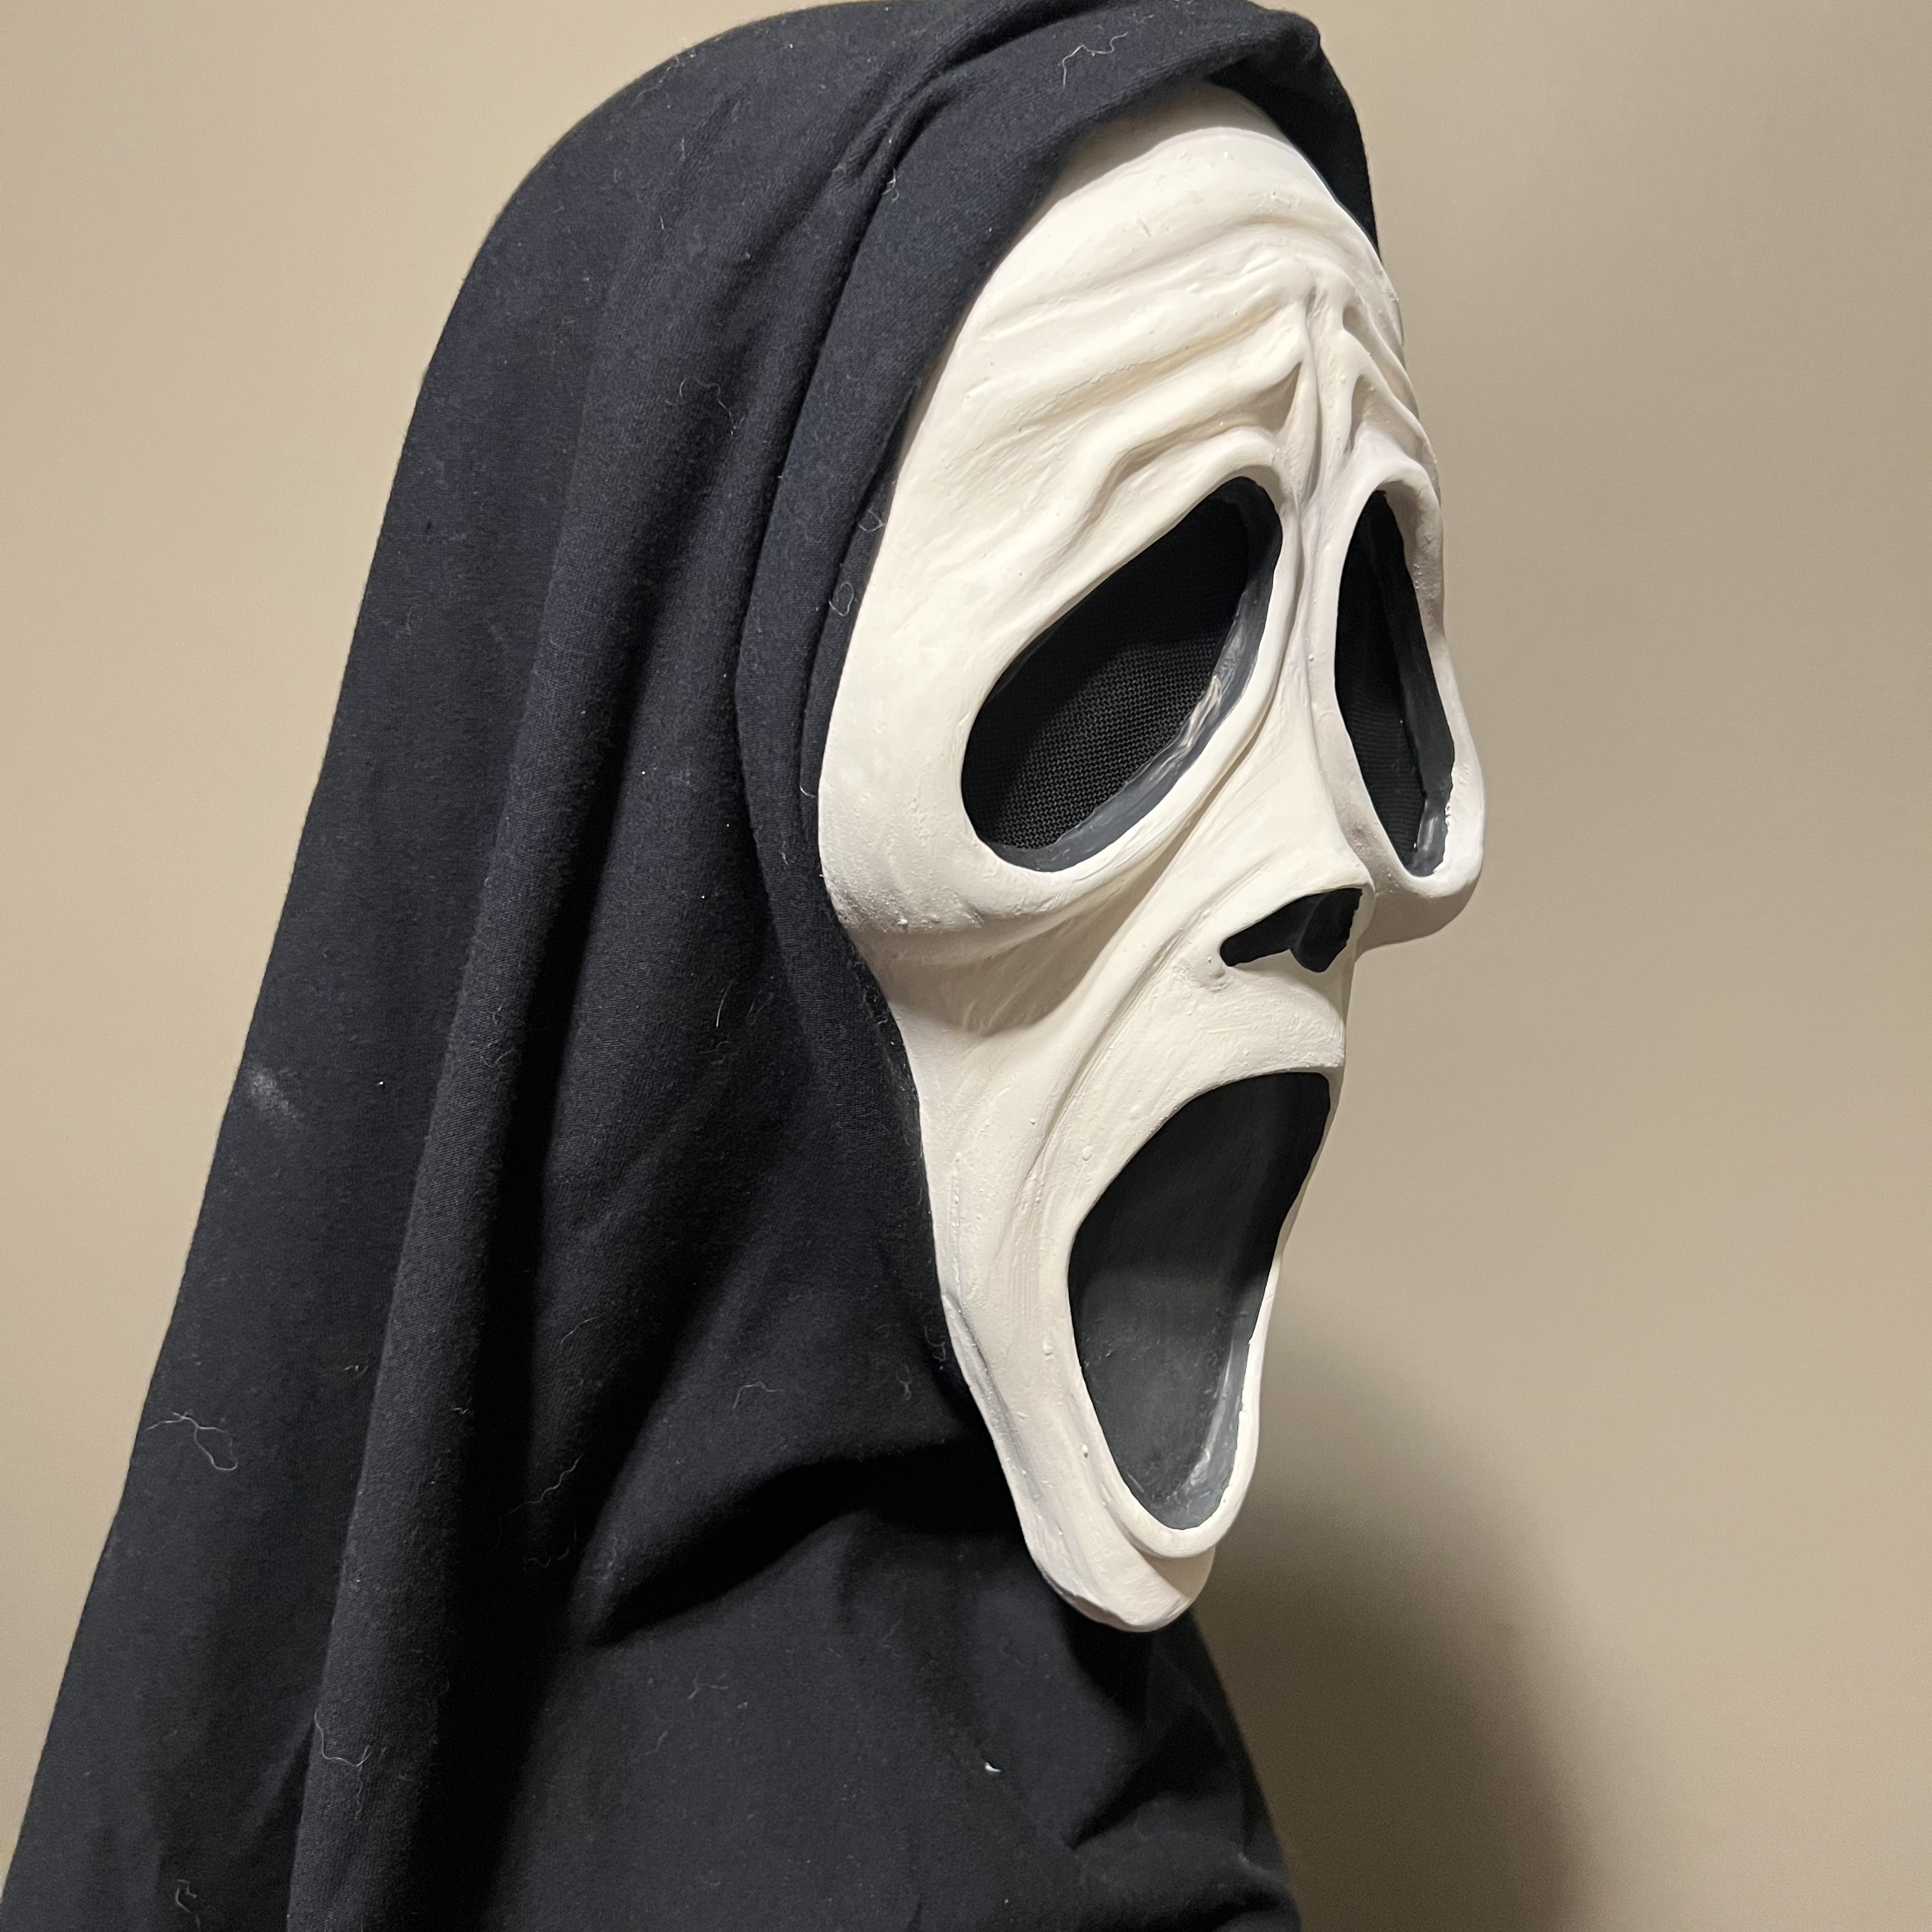 Scary Movie "The Killer" mask project | RPF Costume and Prop Maker Community